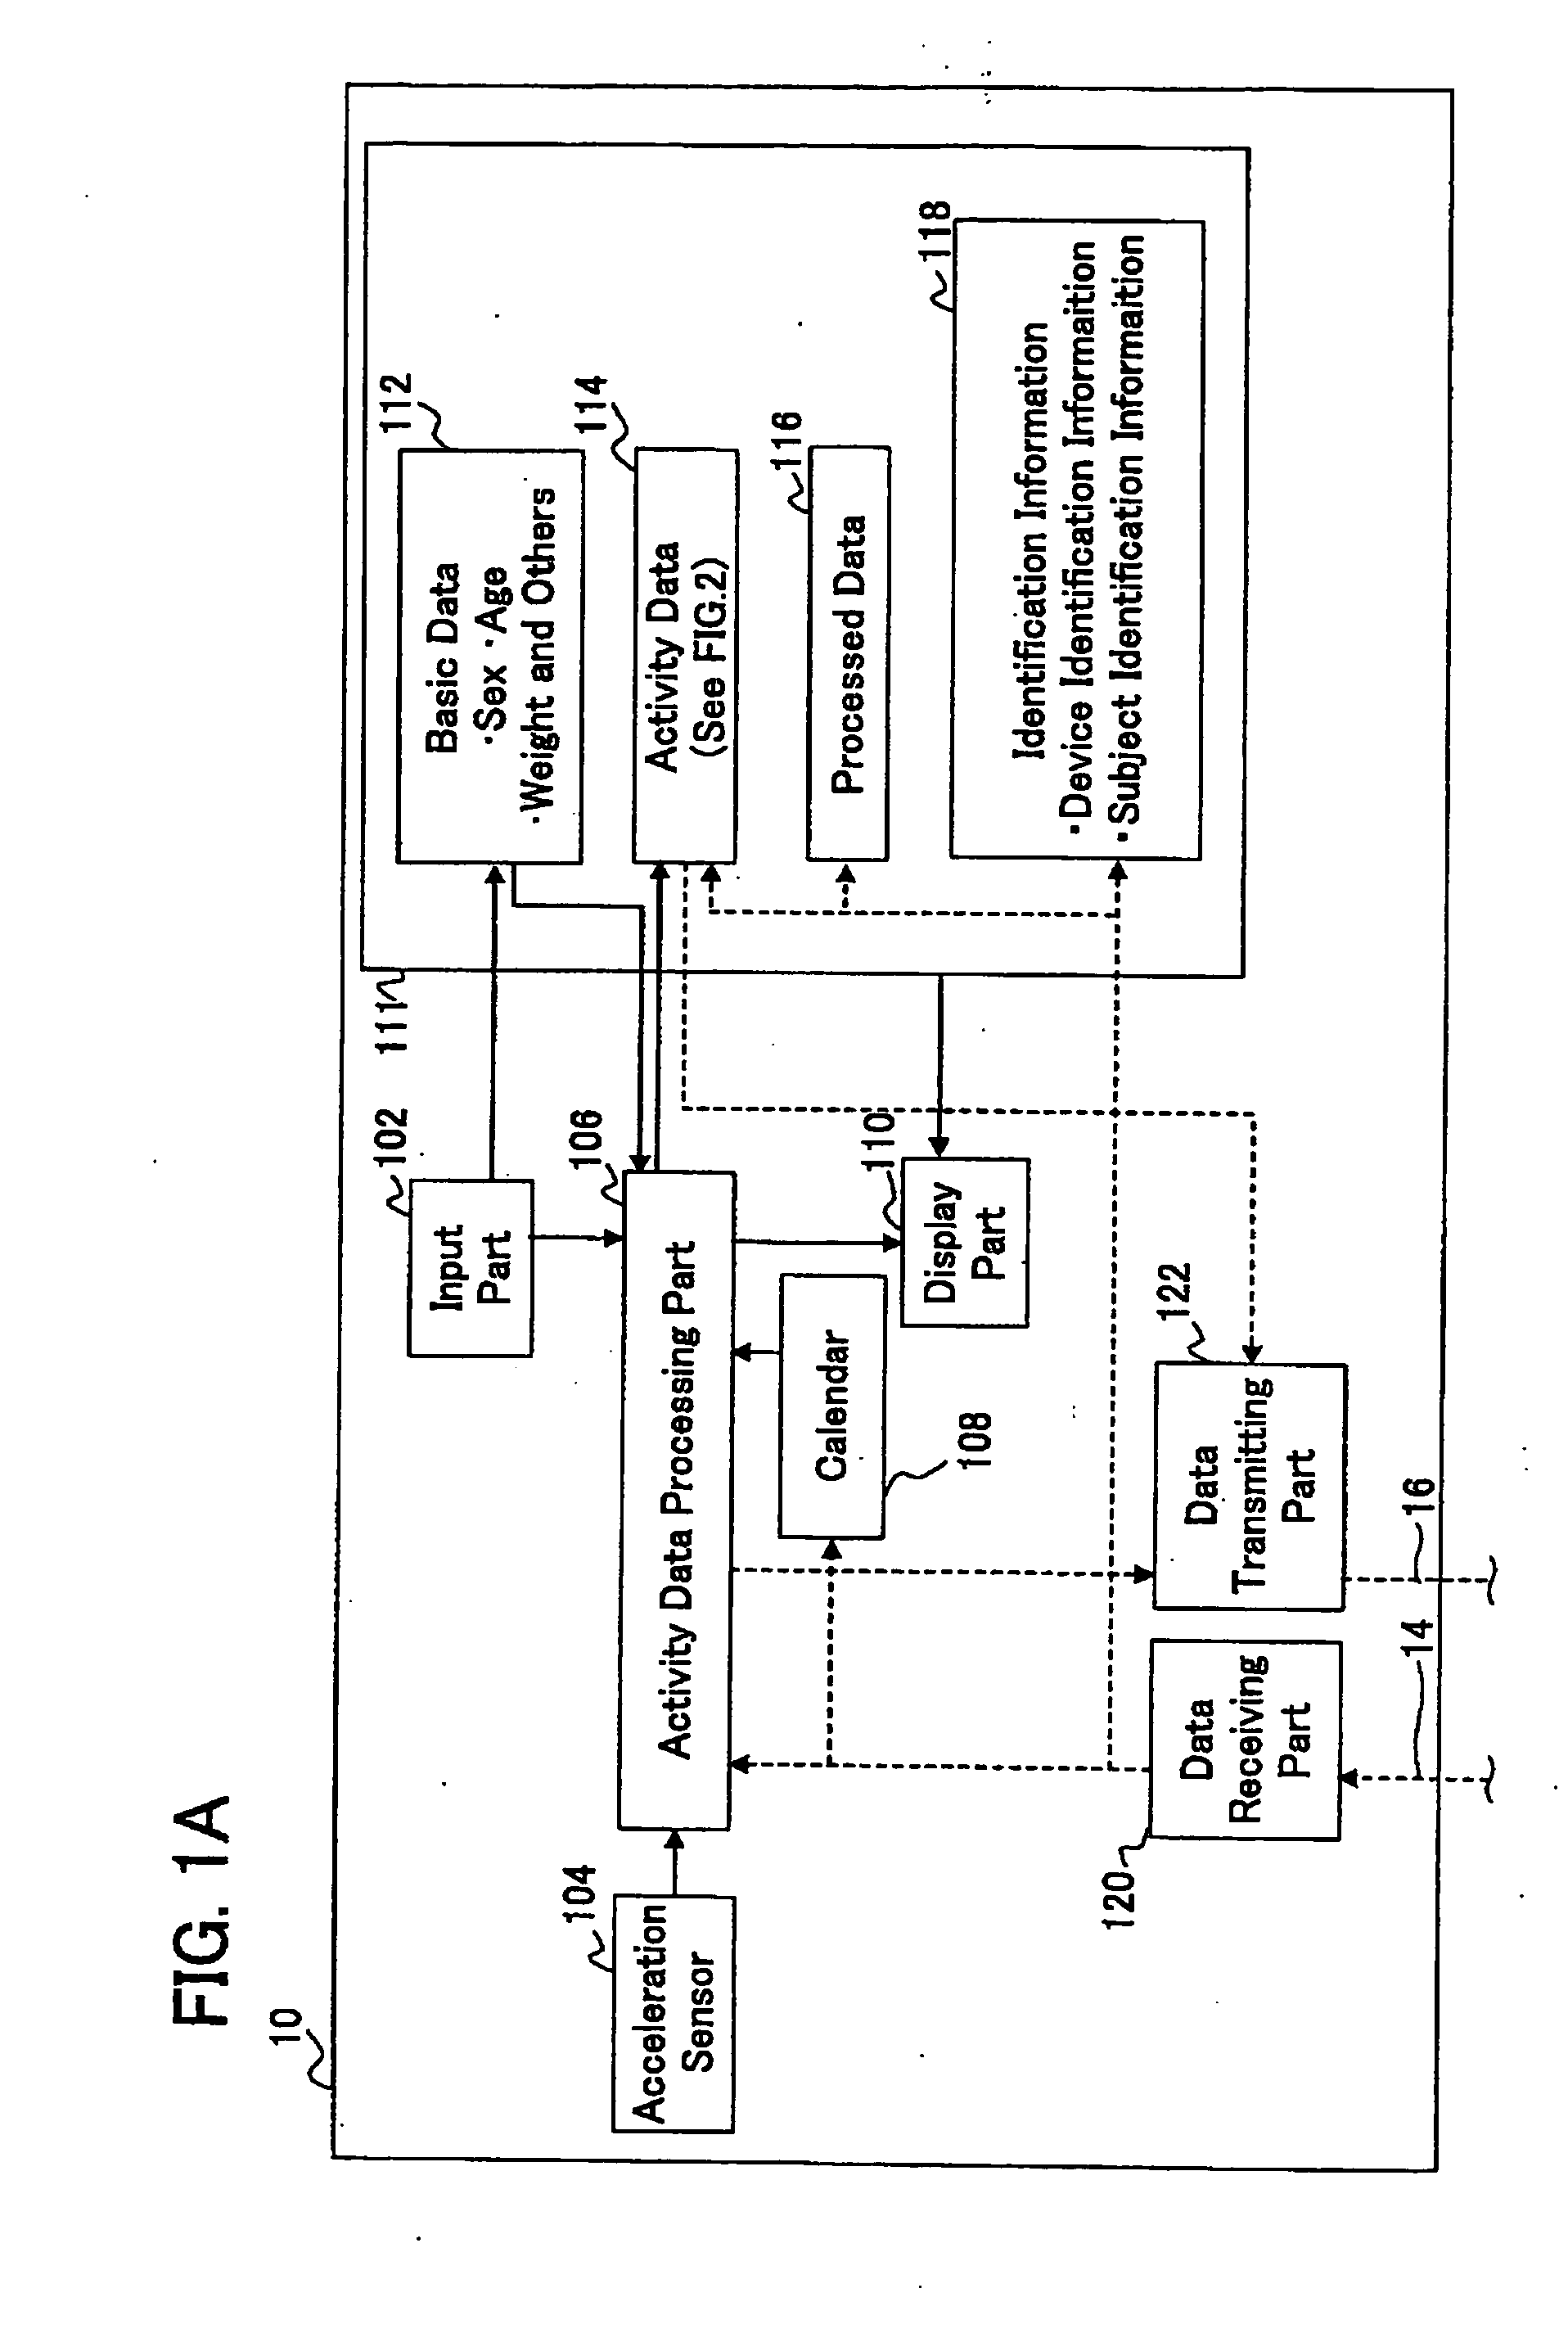 Health management system, activity status measusring device, and data processing device